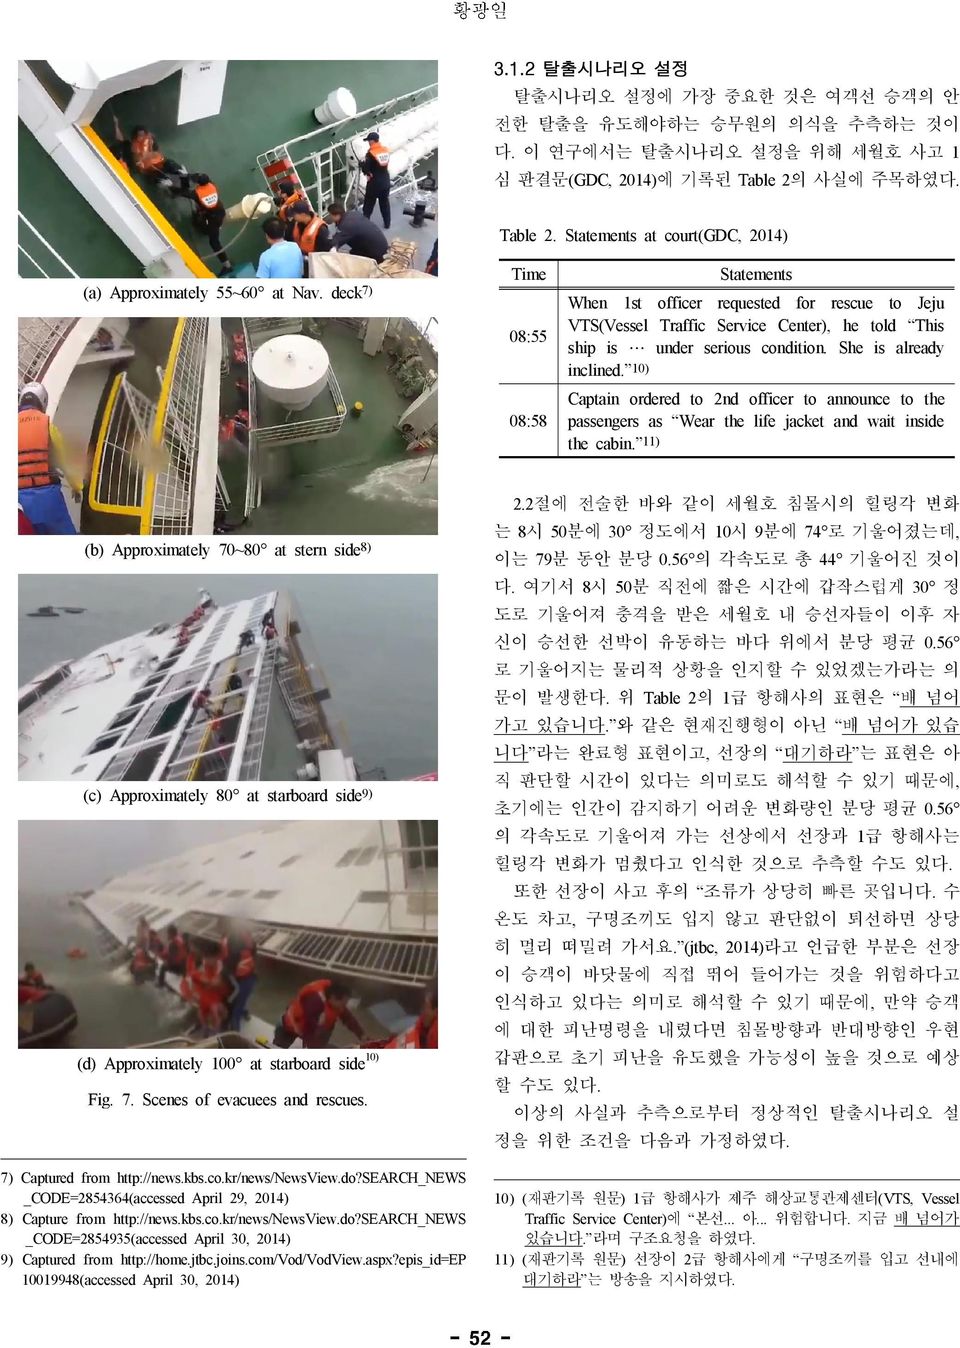 deck 7) Time 08:55 08:58 Statements When 1st officer requested for rescue to Jeju VTS(Vessel Traffic Service Center), he told This ship is under serious condition. She is already inclined.